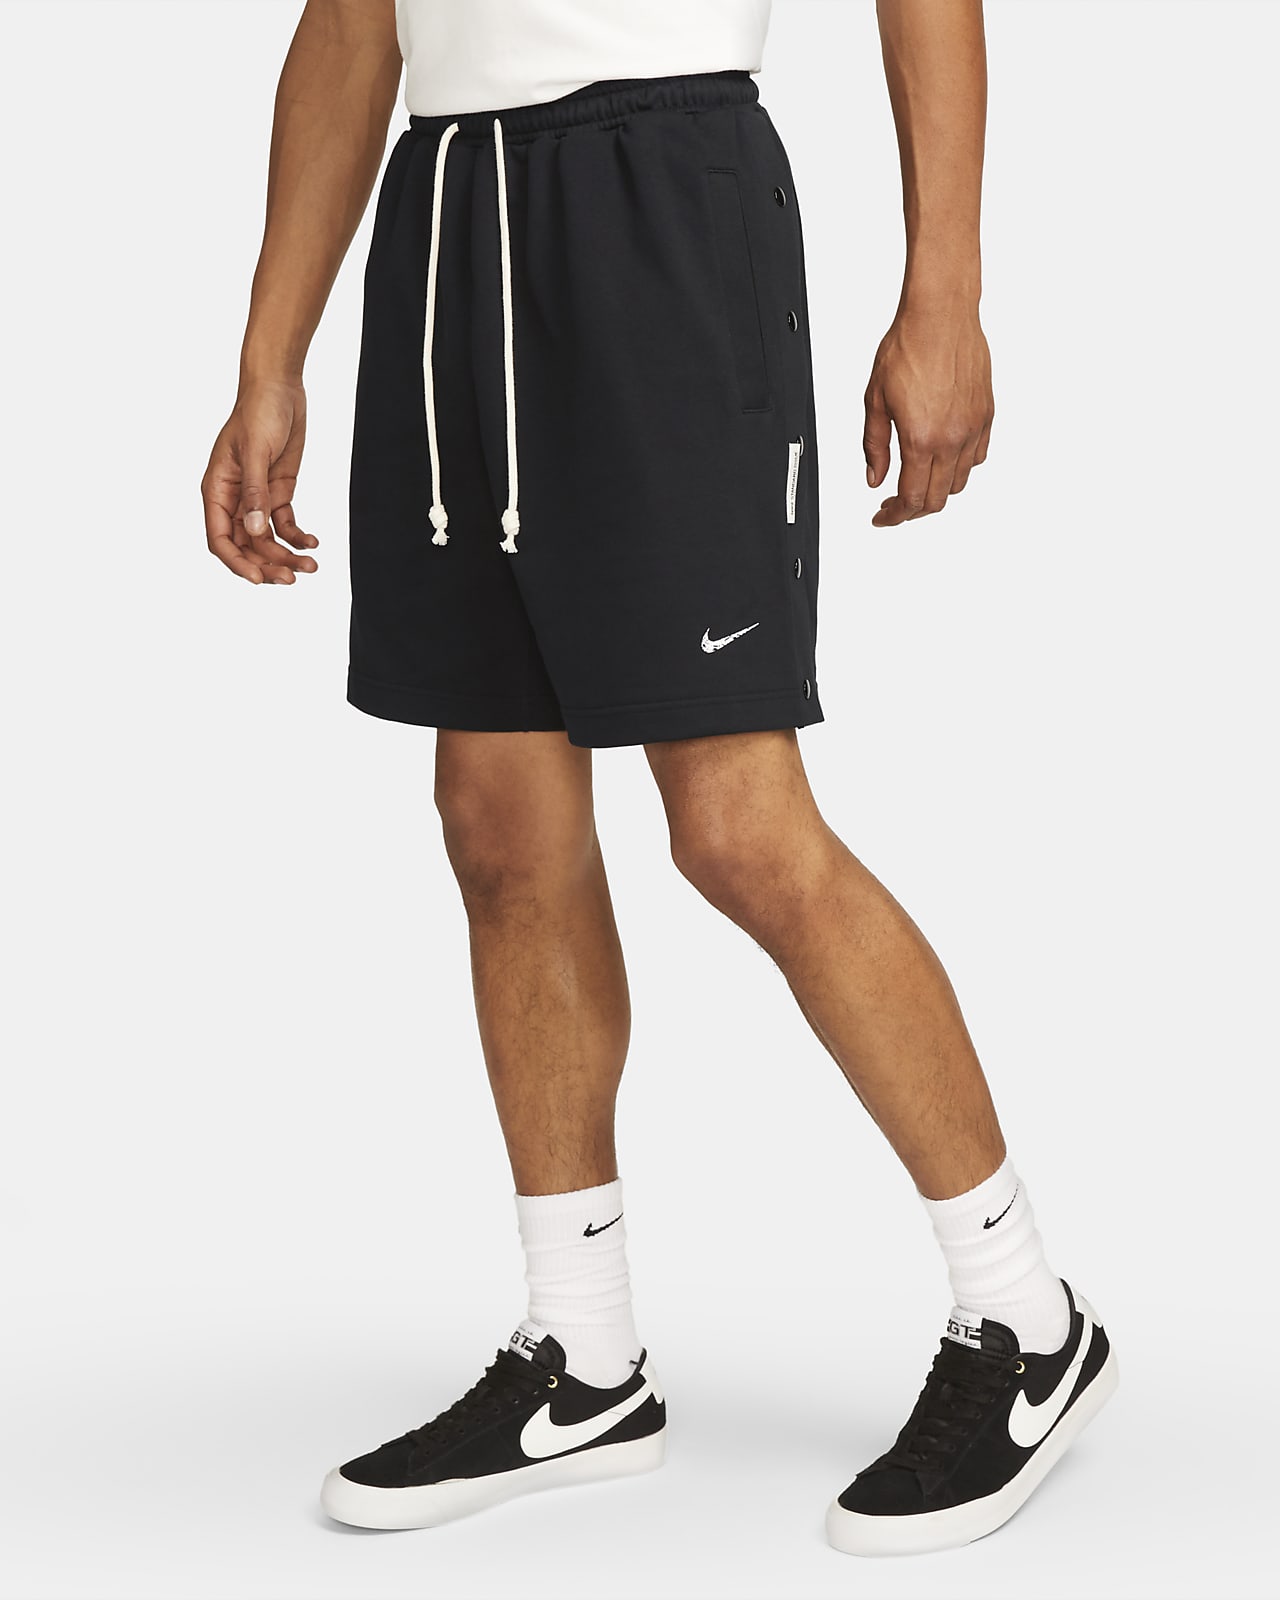 Nike Dri-FIT Standard Issue Men's 8 French Terry Basketball Shorts